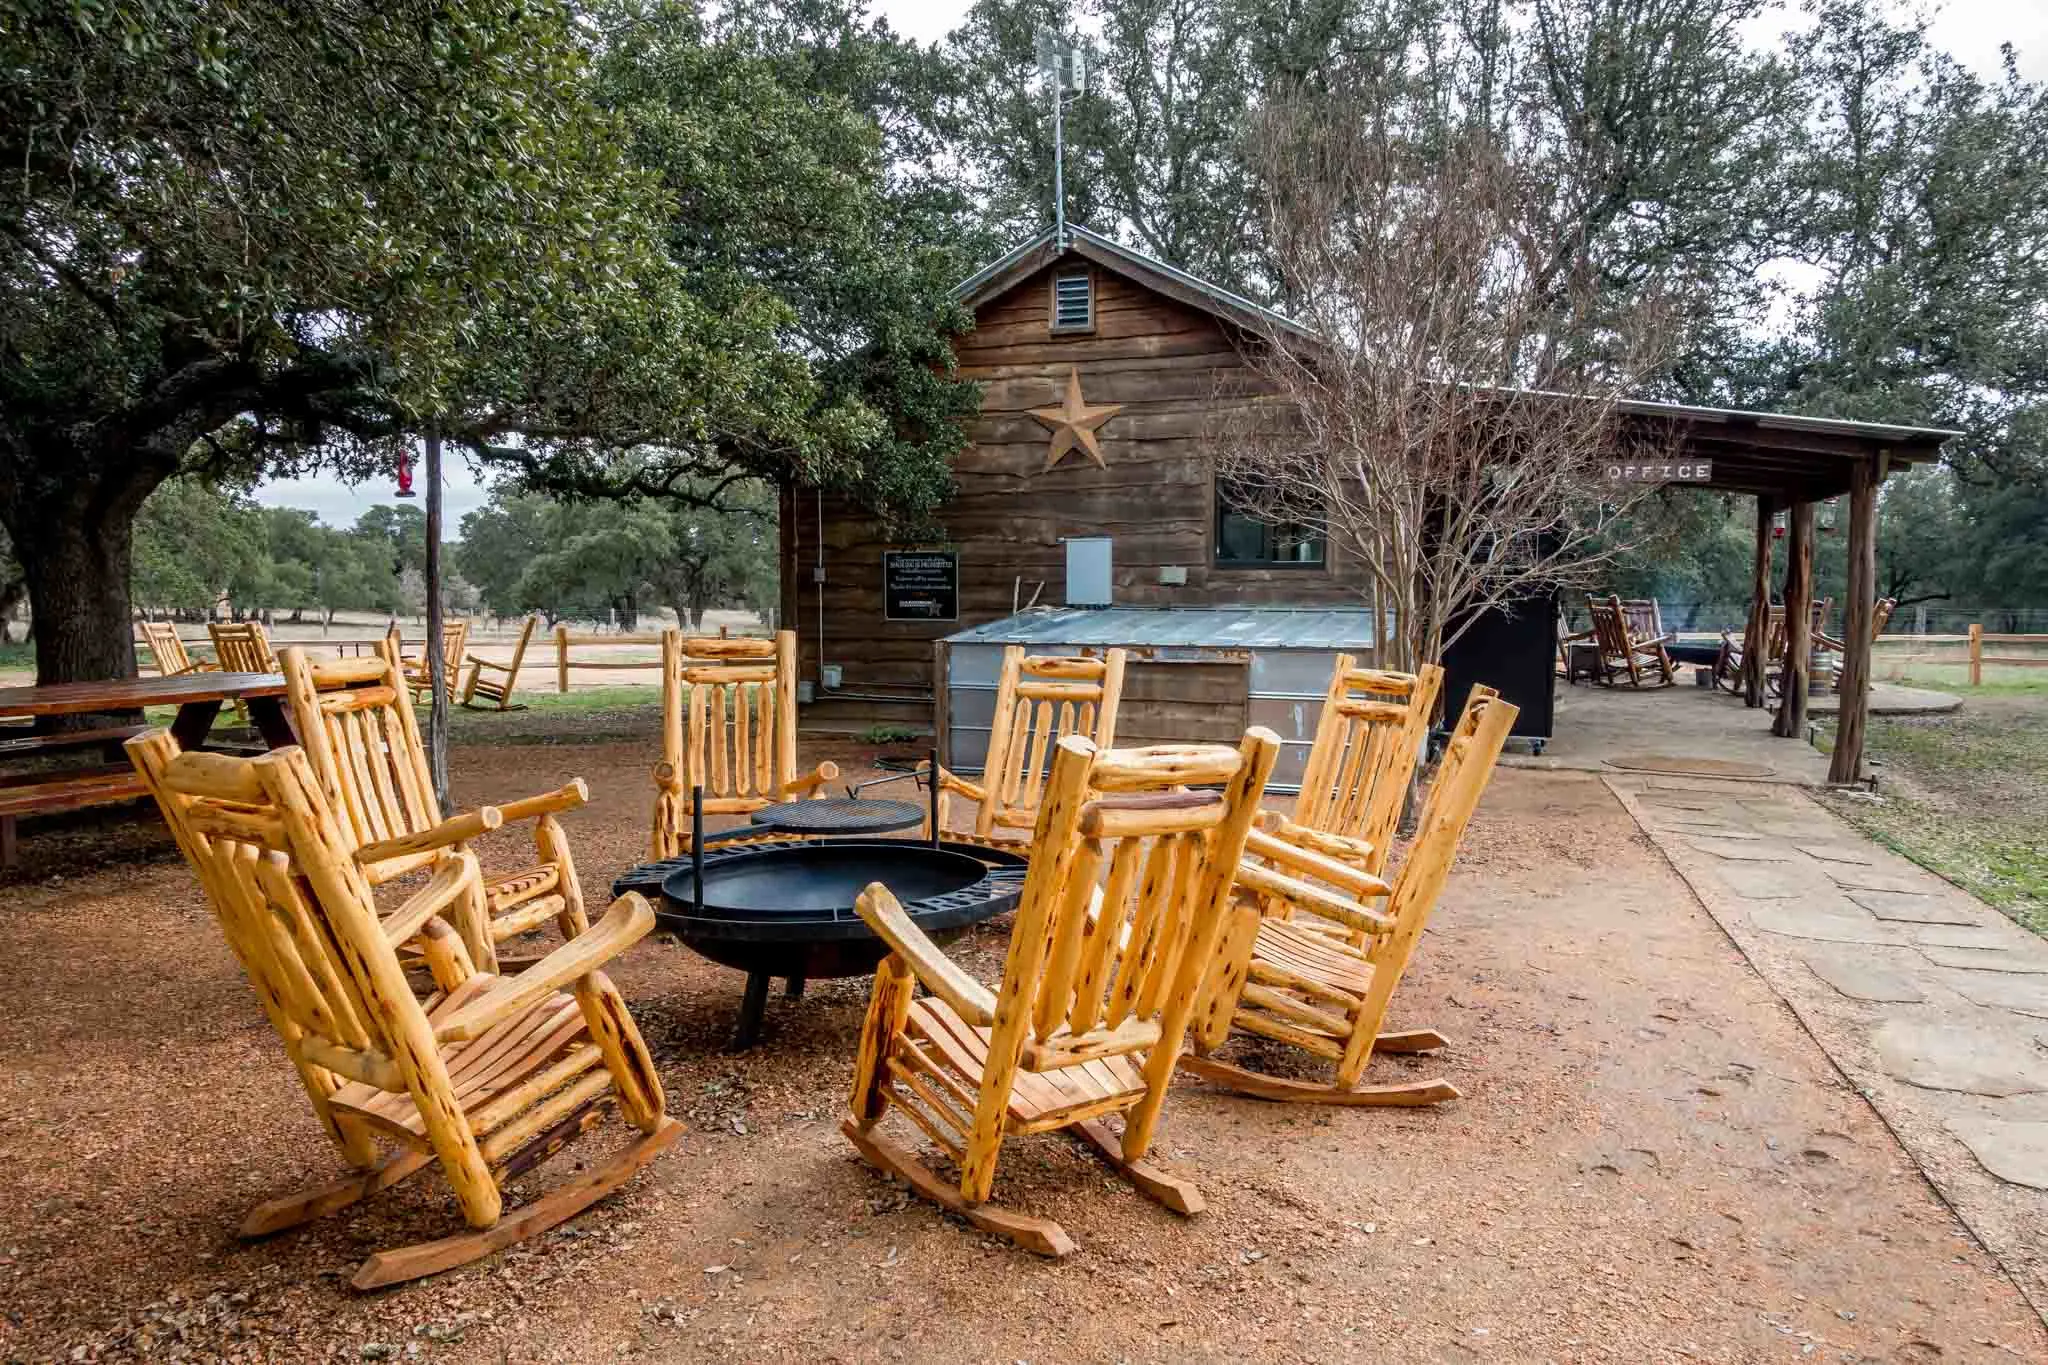 Rocking chairs around fire pit outside a wooden building